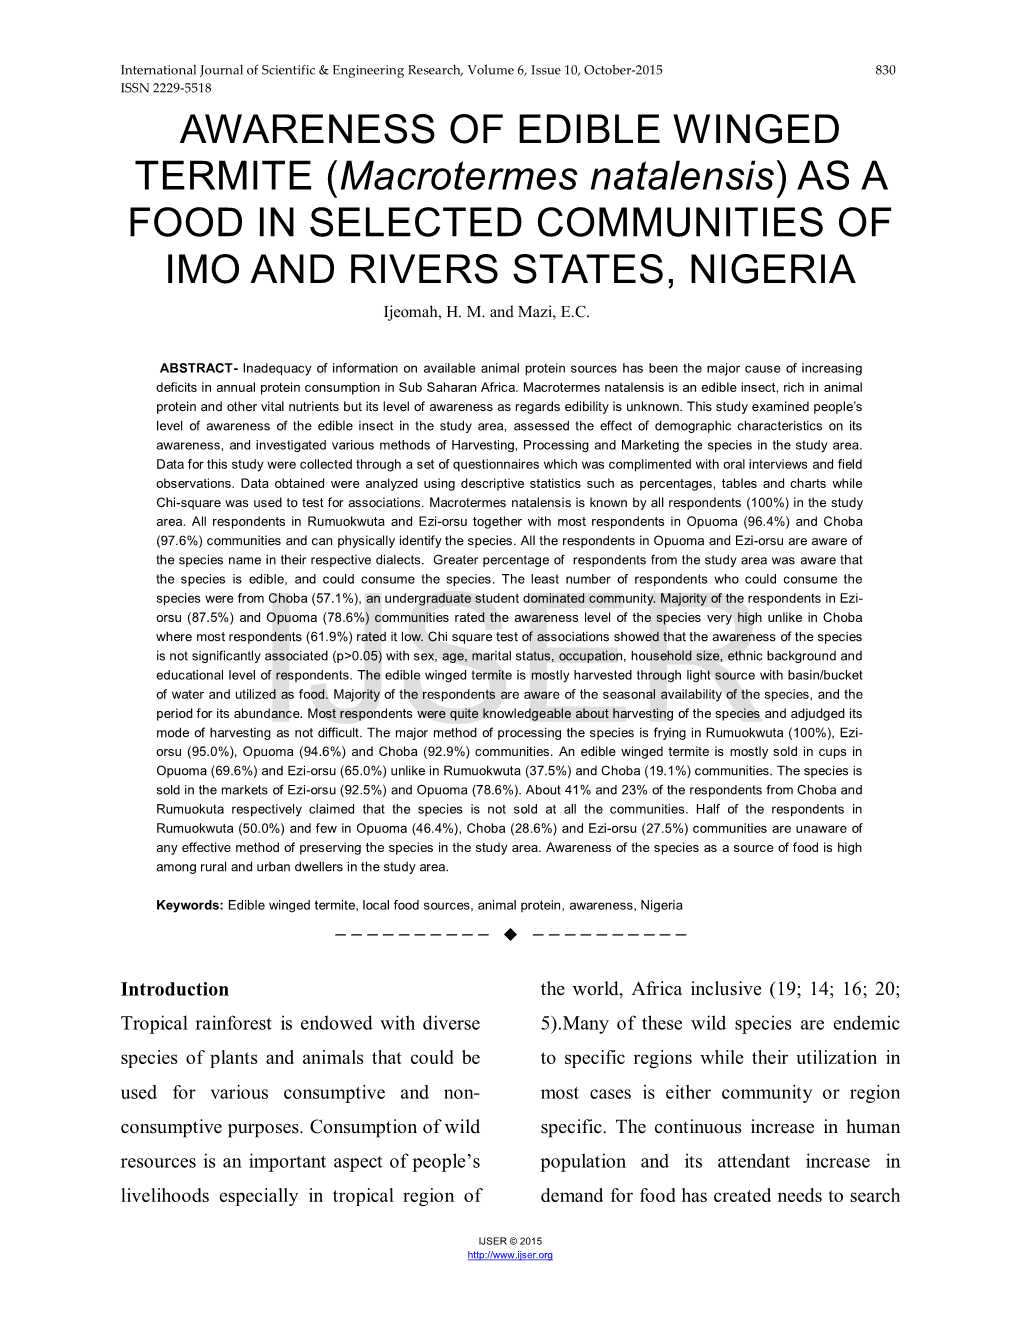 AWARENESS of EDIBLE WINGED TERMITE (Macrotermes Natalensis) AS a FOOD in SELECTED COMMUNITIES of IMO and RIVERS STATES, NIGERIA Ijeomah, H